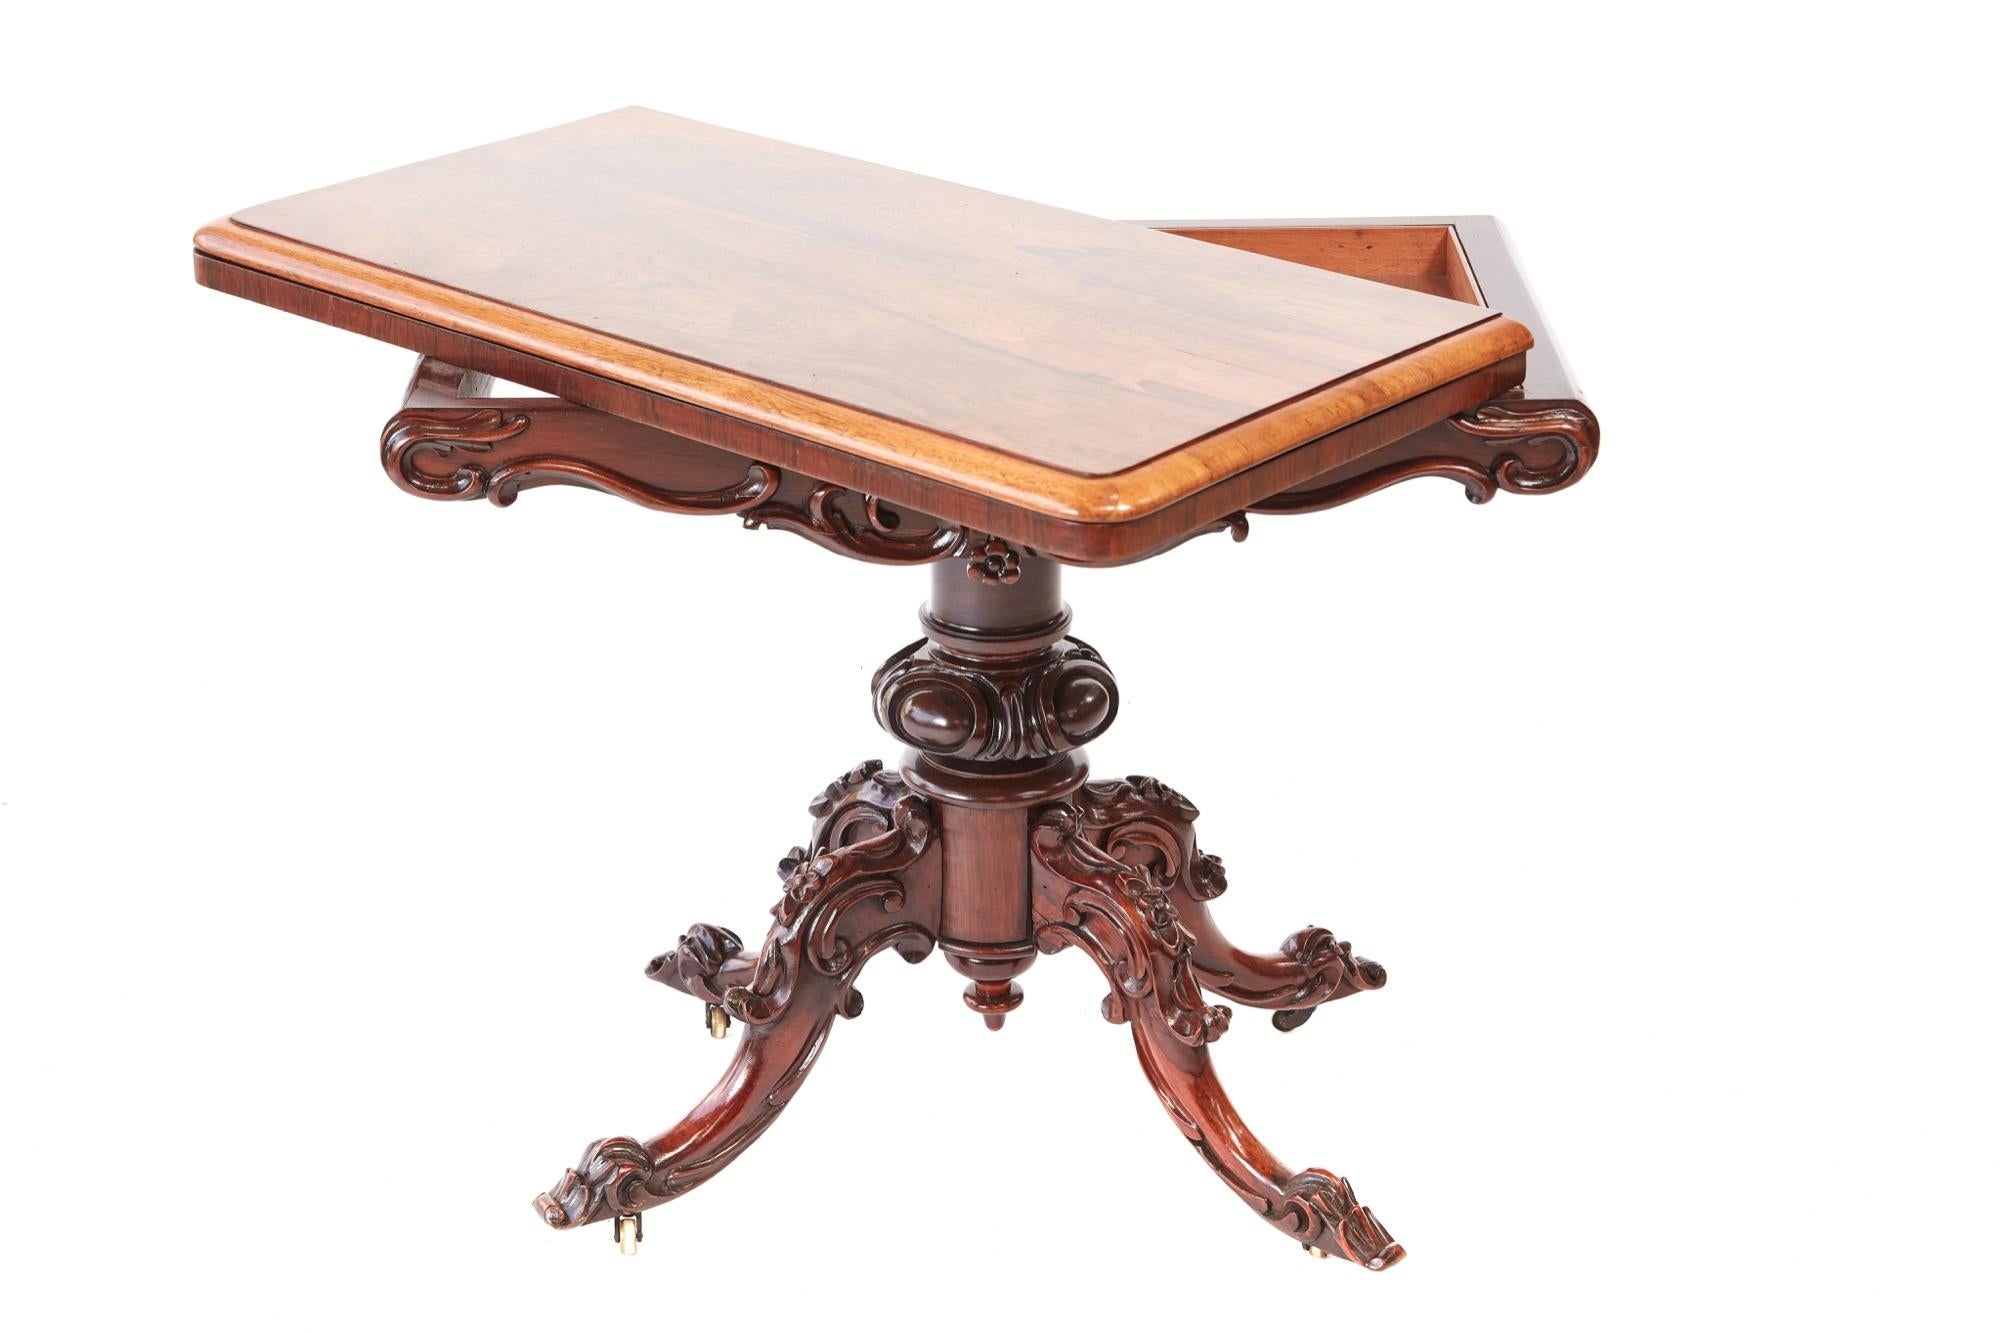 Quality Victorian carved rosewood card table. This splendid example has an attractive swivel hardwood top, green baize interior with an elegant shaped carefully carved frieze. The carved base is outstanding with a carved shaped column supported by